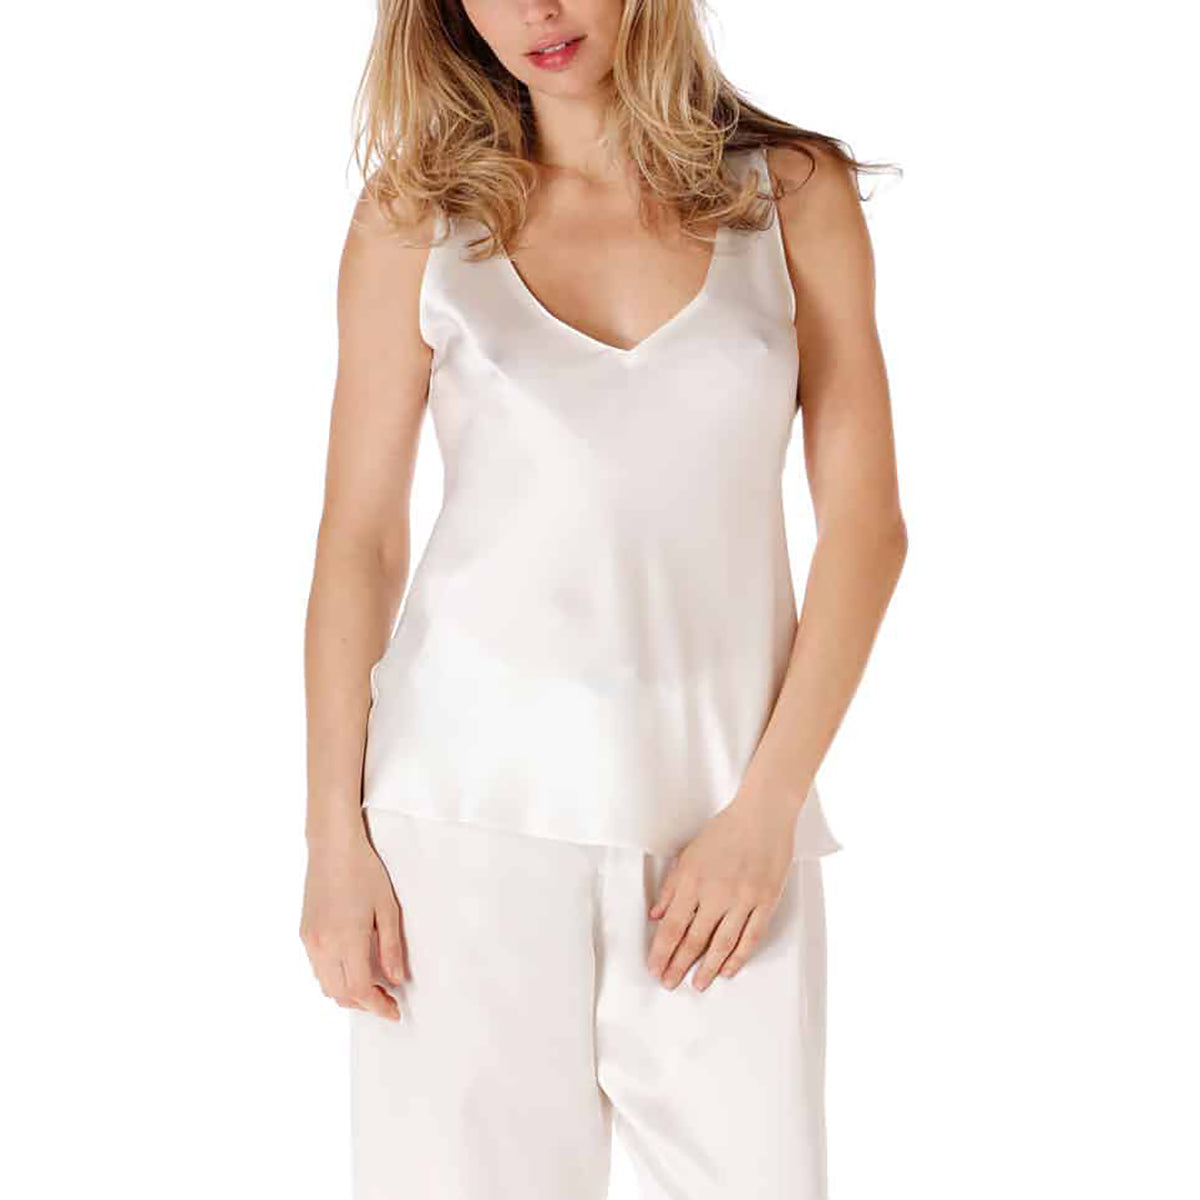 Buy SMROCCO Women Front Open Camisole Bra Top TB9065 (White